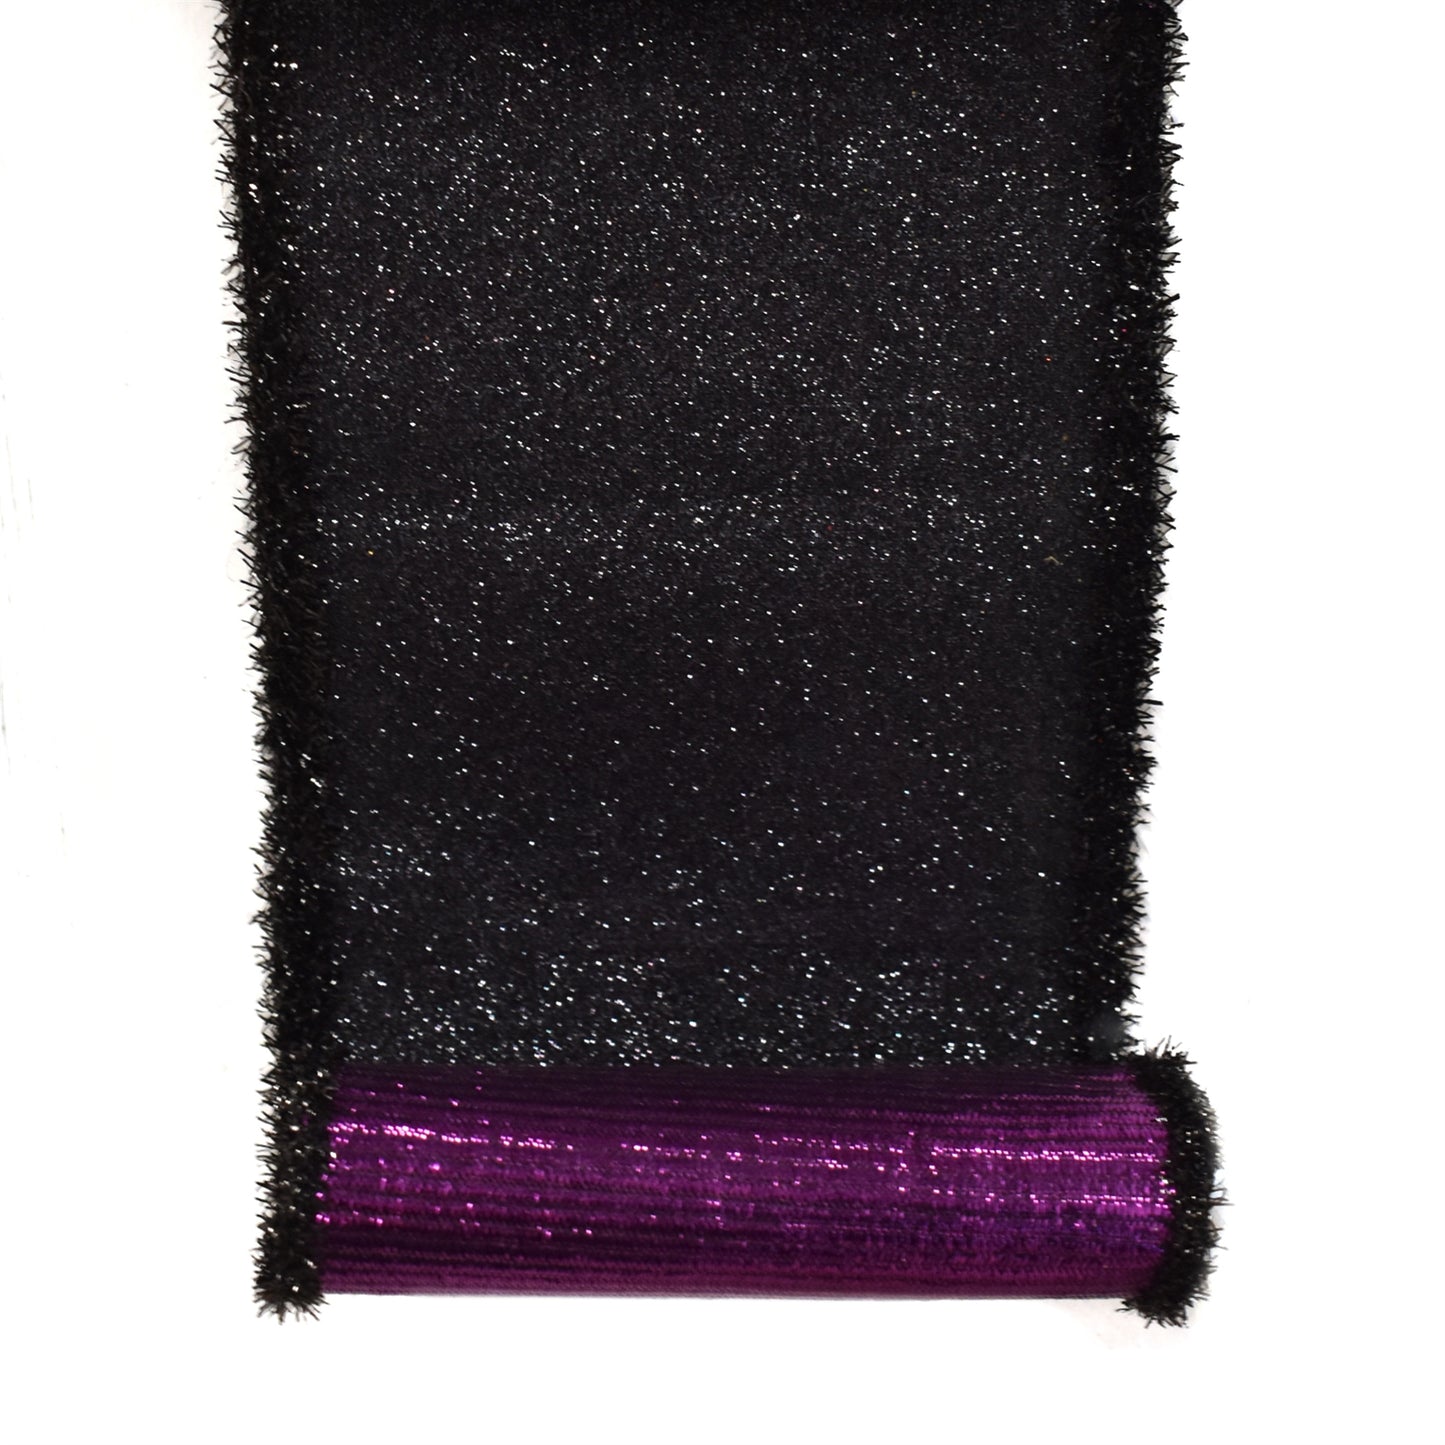 Black Glittered Ribbon with Tinsel Edge and Purple Backing 4" x 10YD | IRC22